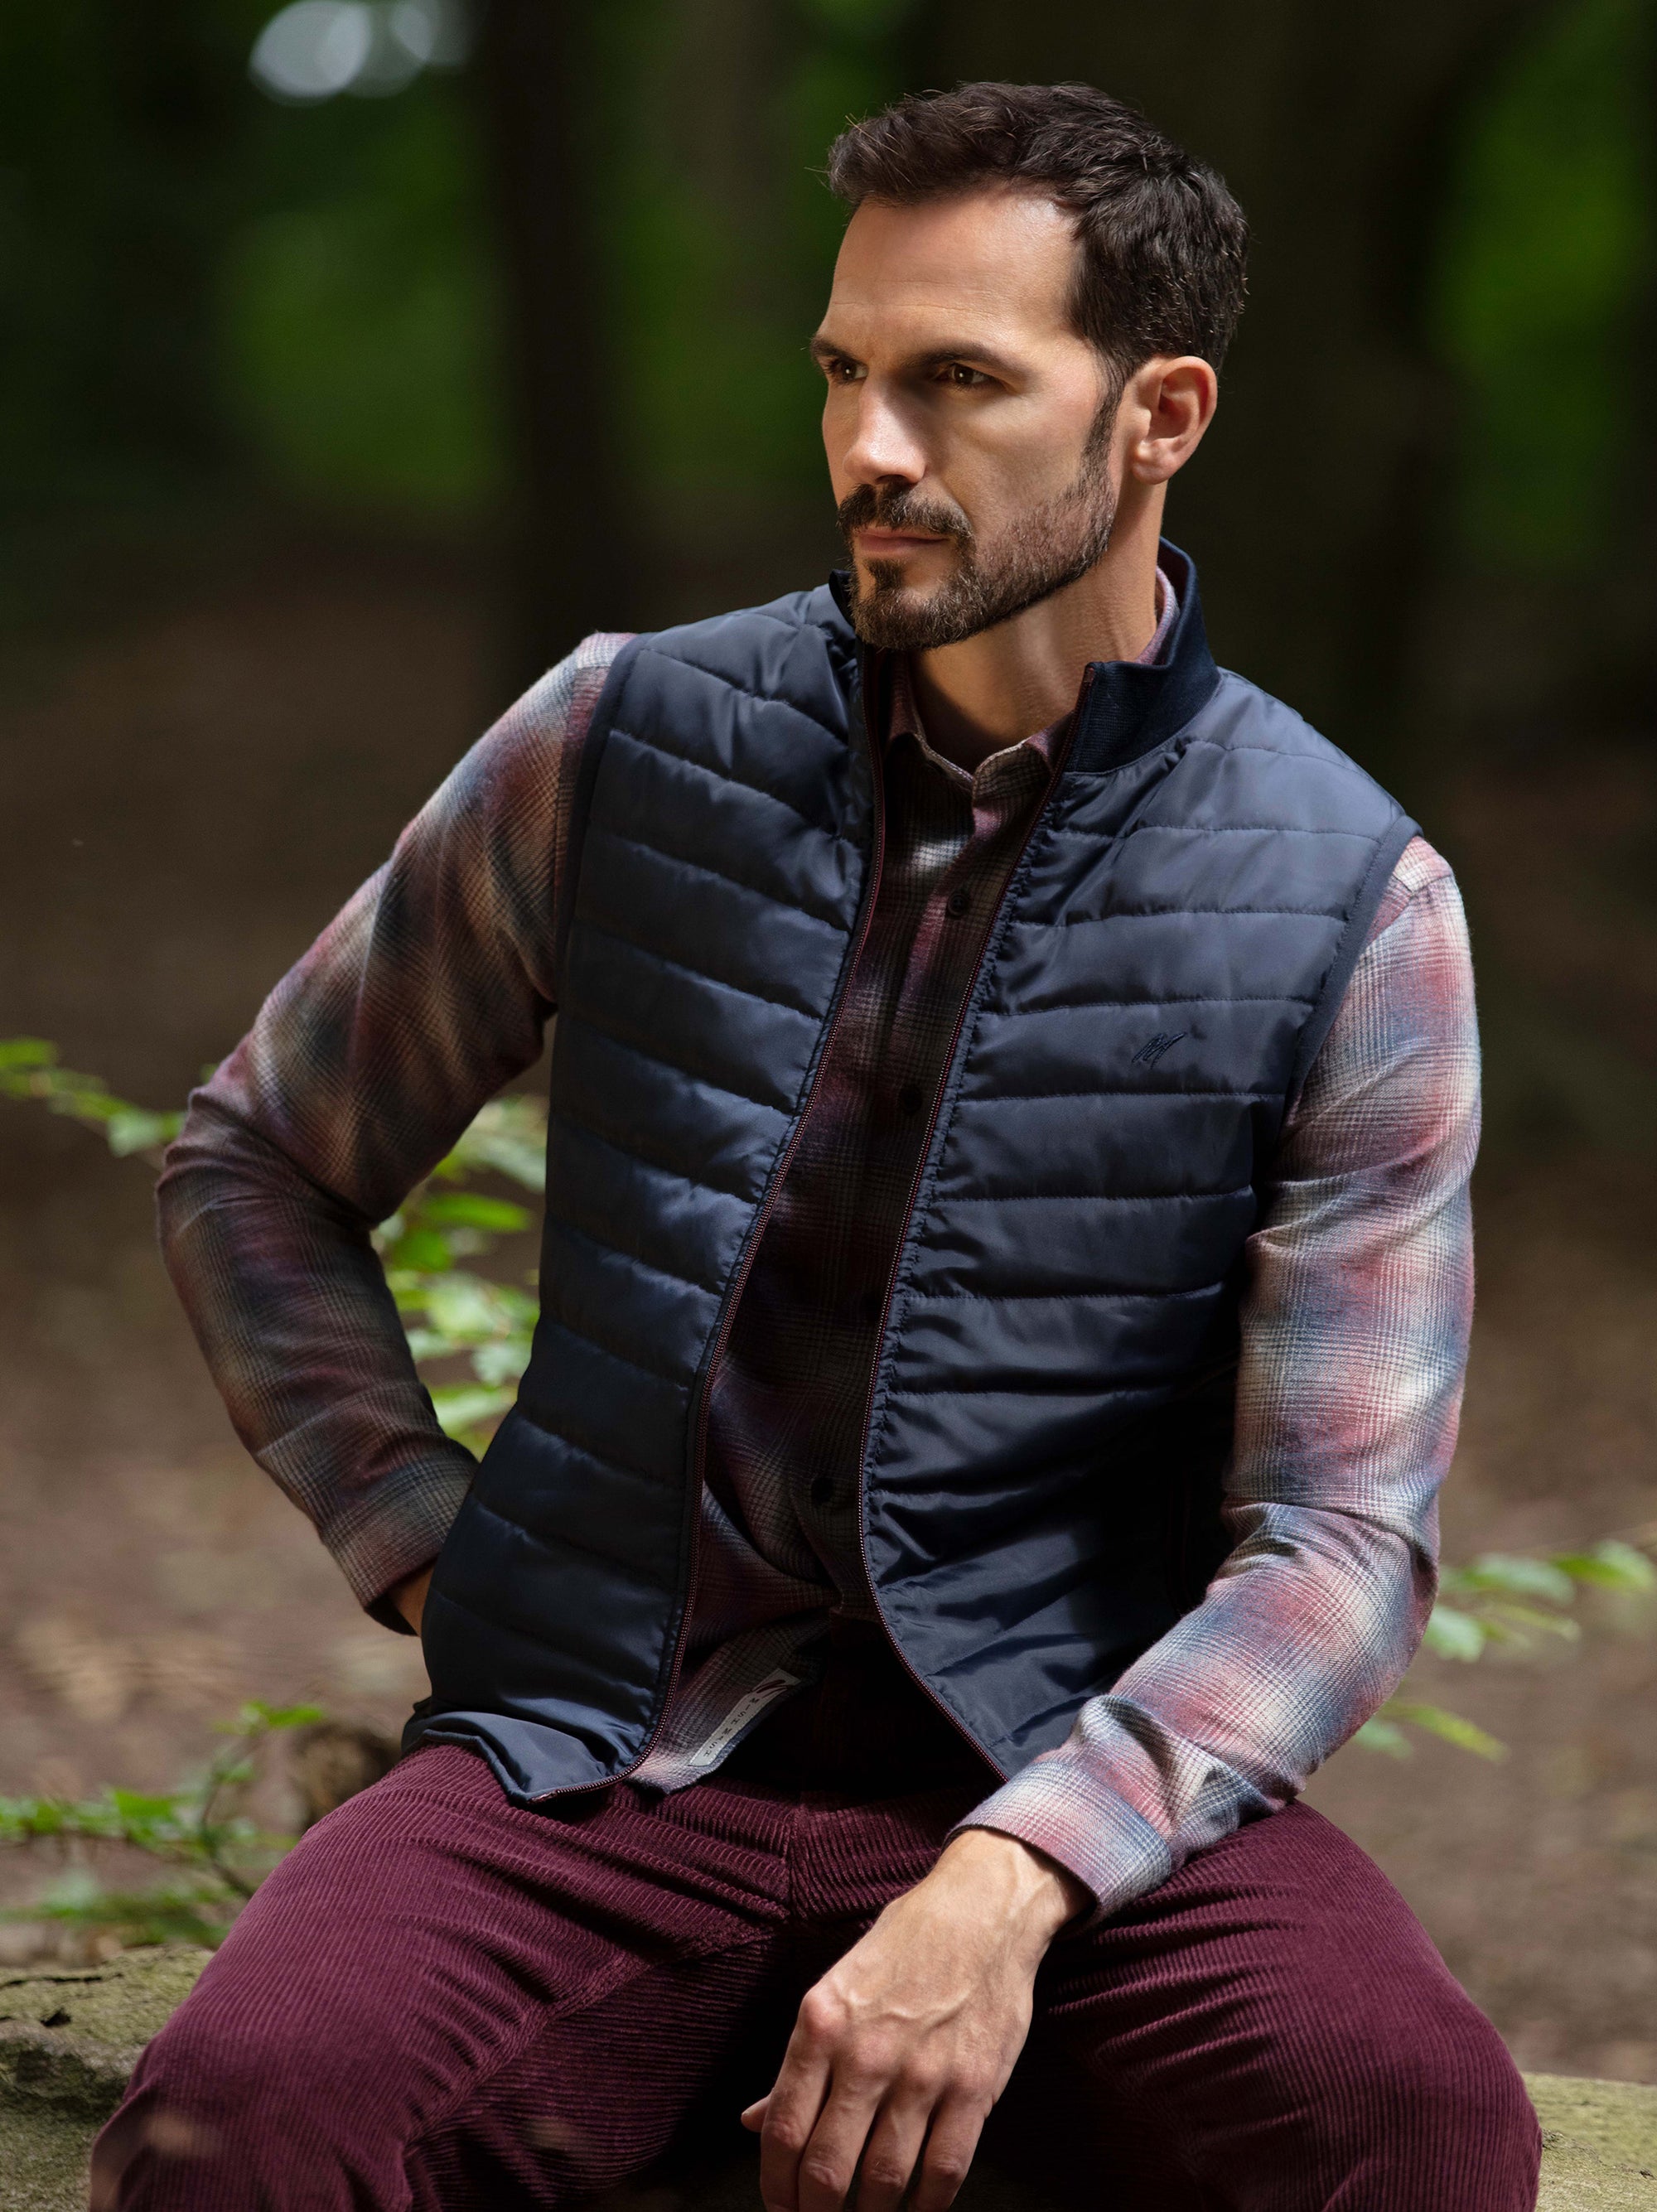 two_tone_navy_quilted_gilet